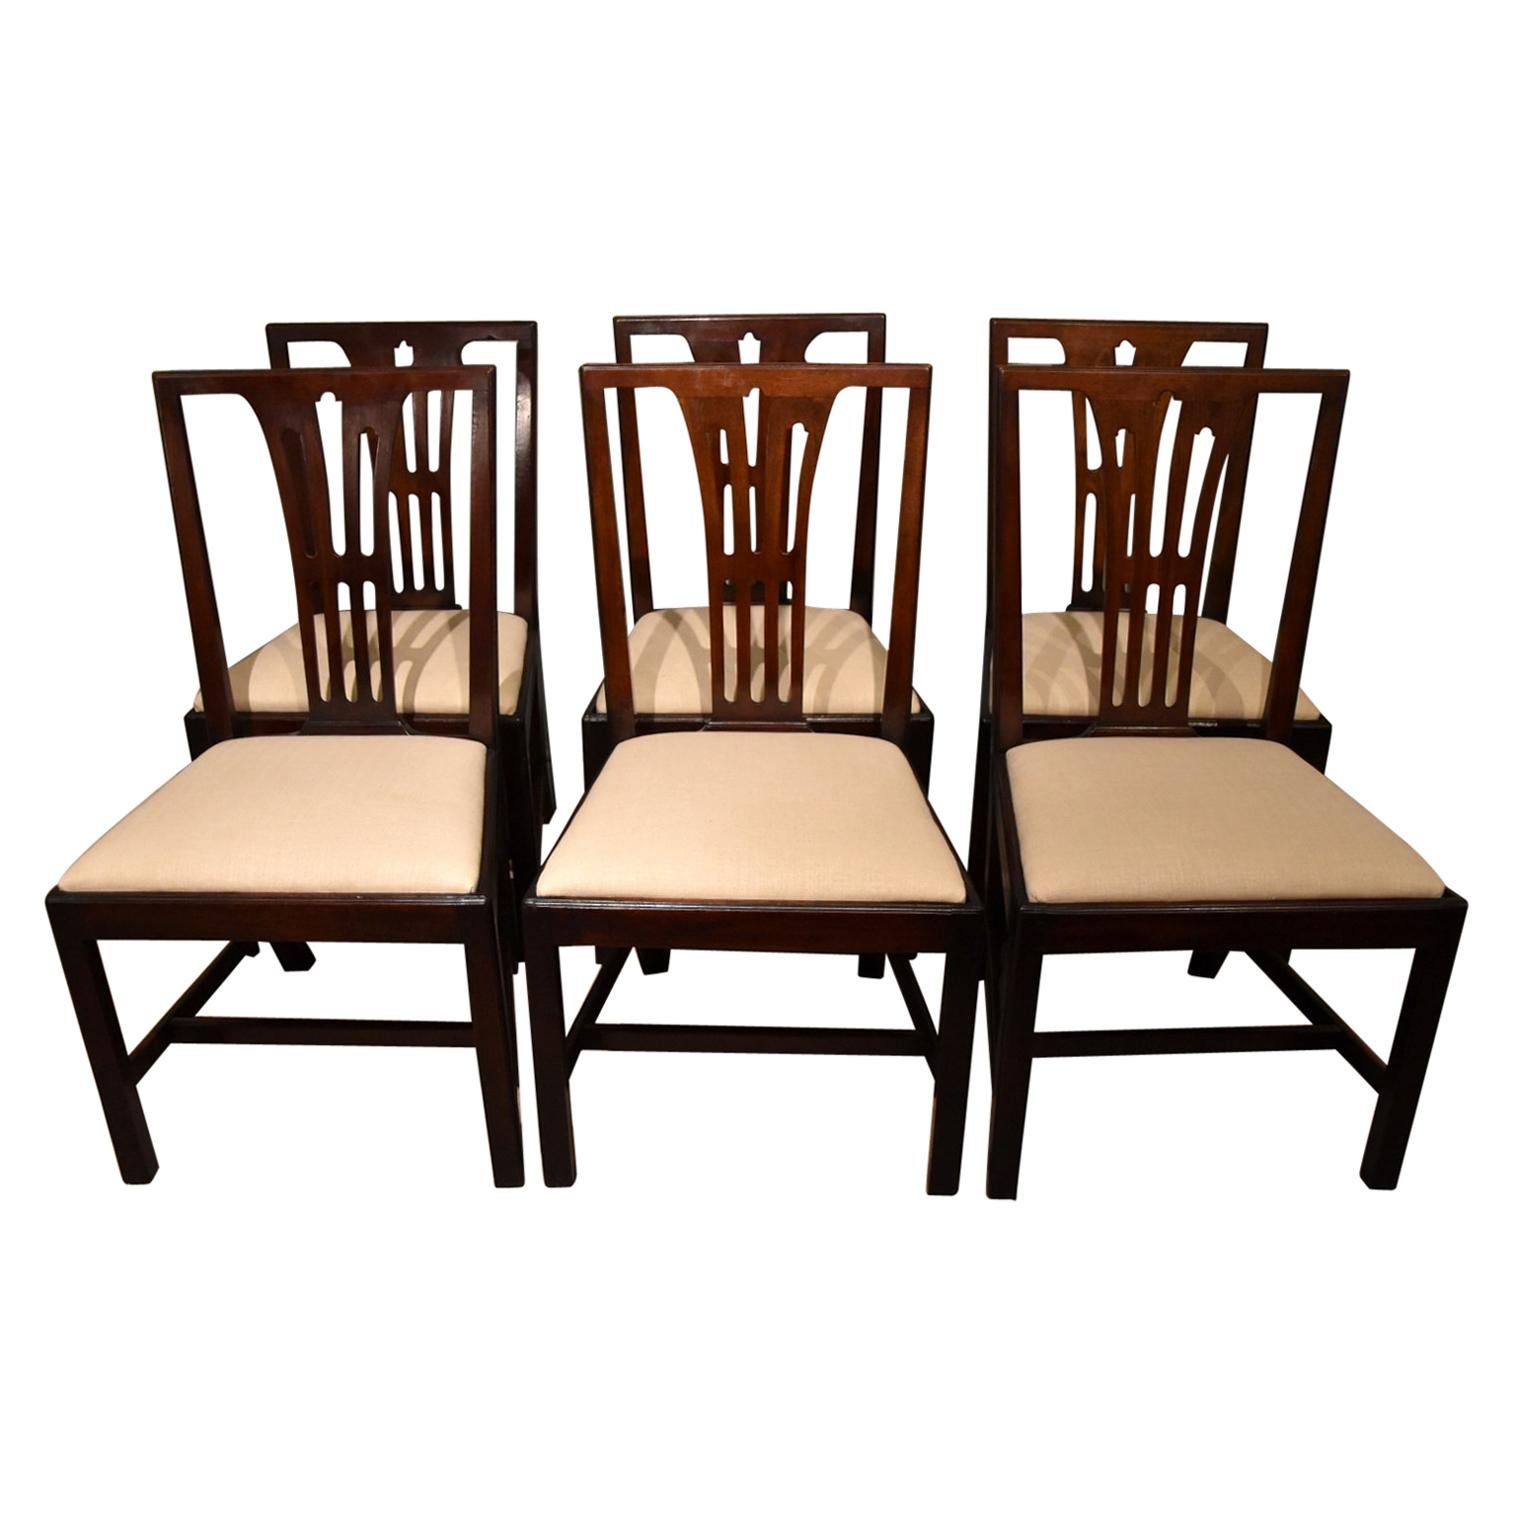 Set of Six Mid-18th Century Dining Chairs